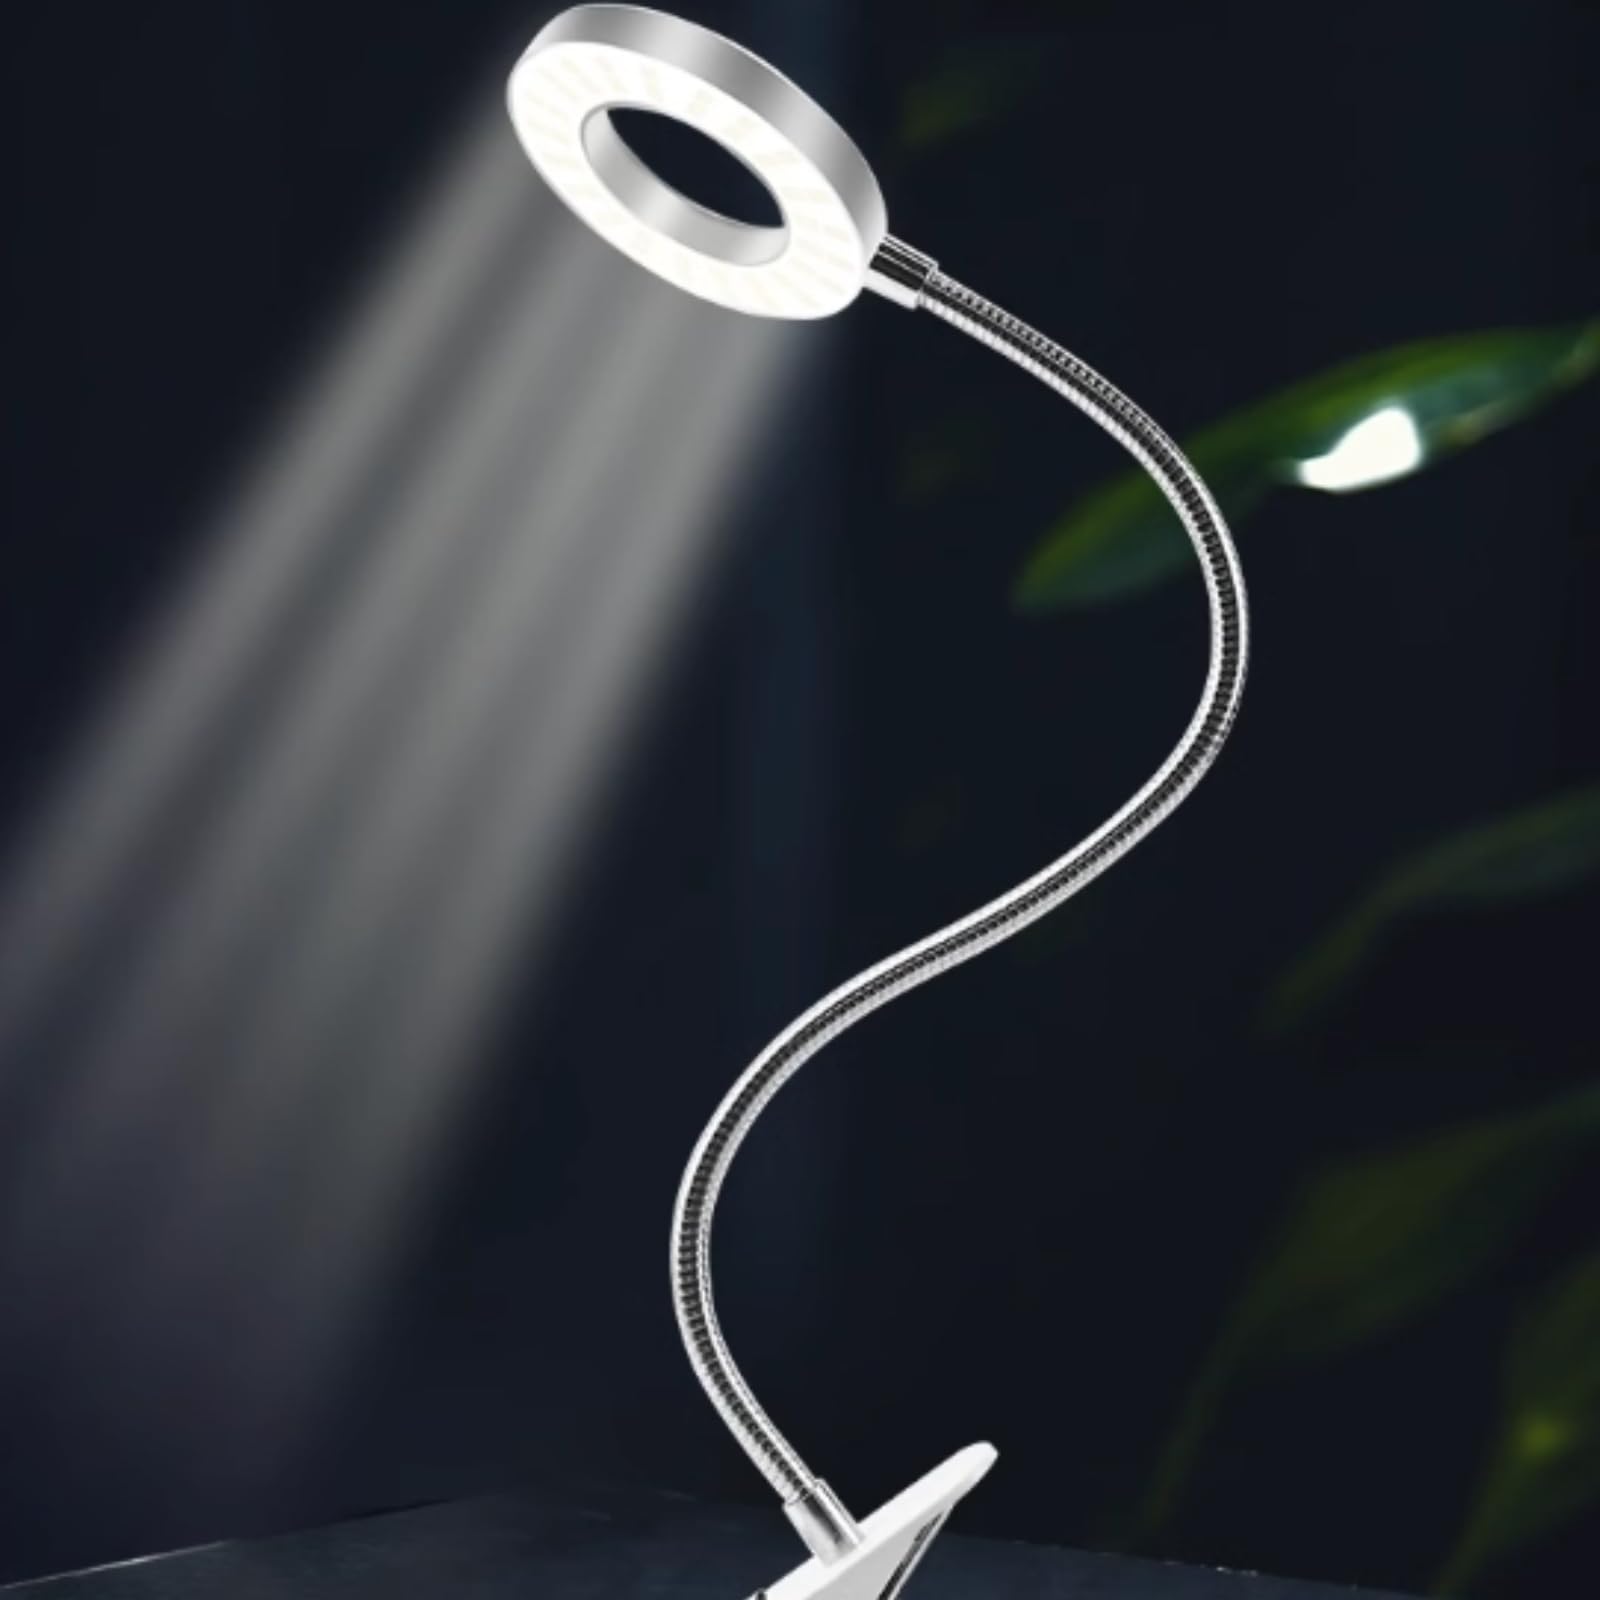 Desk Lamp Clip on Light, USB Powered LED Desk Lamp, Reading Light, Round Ring Arm Flexible Swing Eye Protection Eye Caring Small Lamp for Bed Headboard Reading Makeup Eyebrow